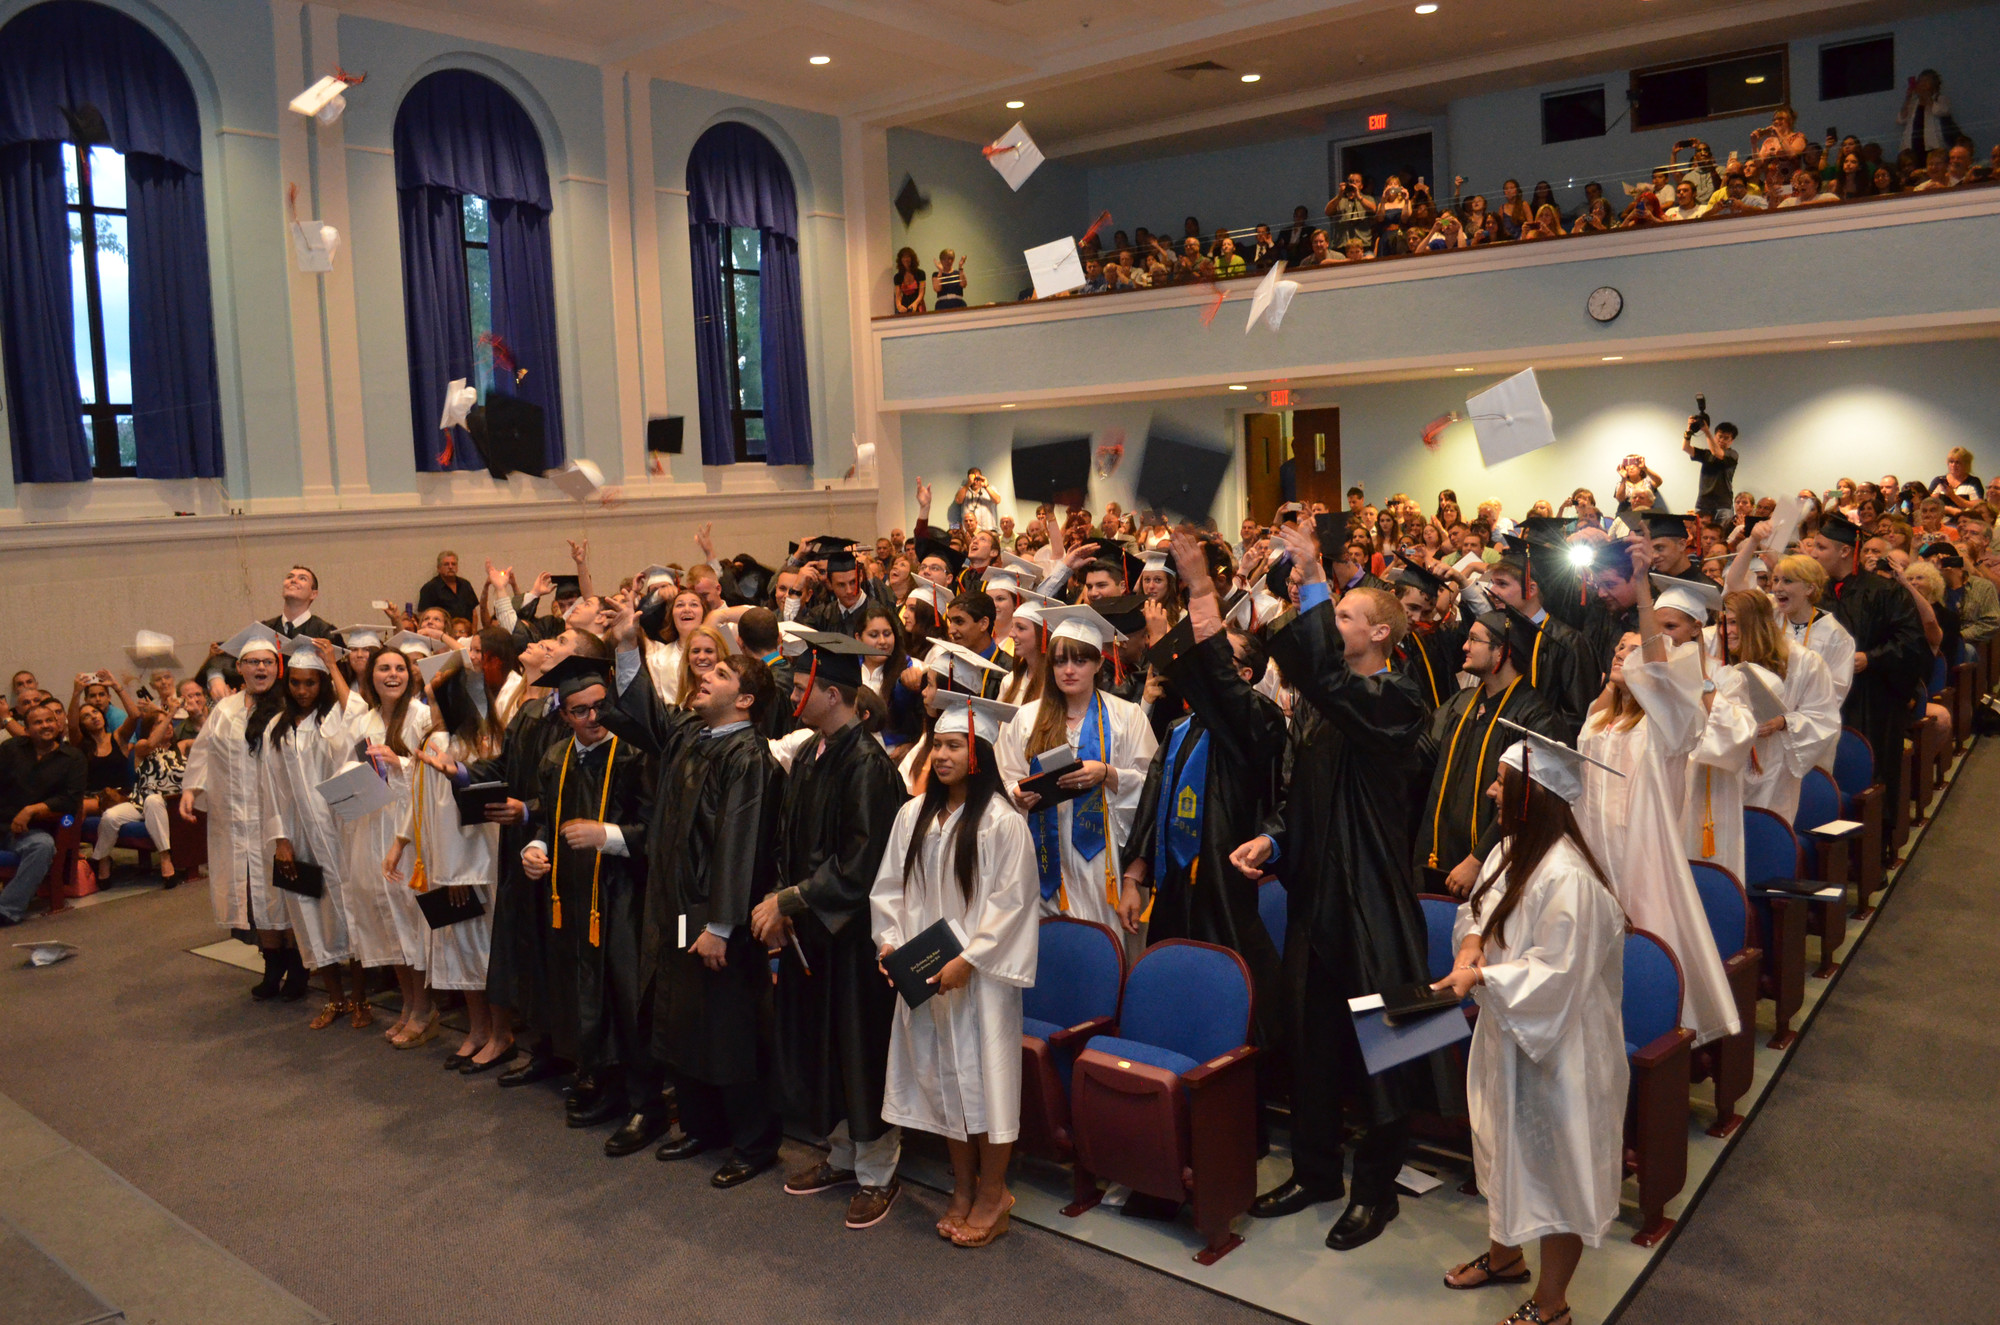 The Class of 2014 threw their hats up in the air as they were pronounced as graduated seniors.